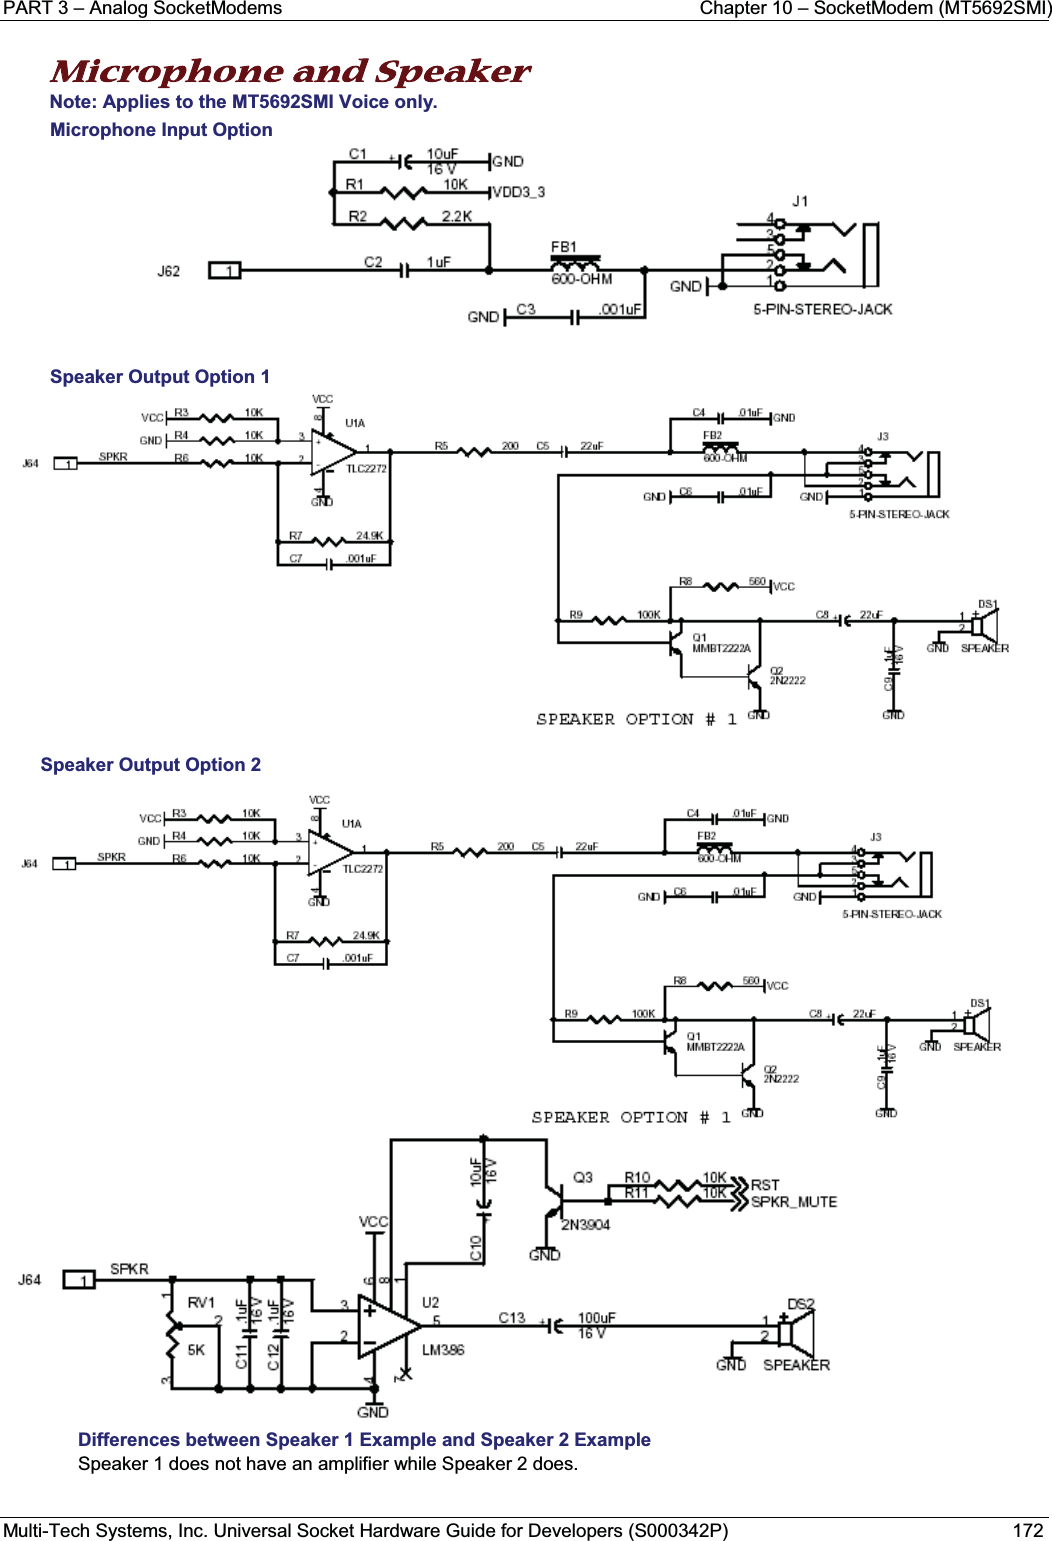 PART 3 – Analog SocketModems Chapter 10 – SocketModem (MT5692SMI)Multi-Tech Systems, Inc. Universal Socket Hardware Guide for Developers (S000342P) 172MMicrophone and Speaker Note: Applies to the MT5692SMI Voice only.Microphone Input OptionSpeaker Output Option 1Speaker Output Option 2Differences between Speaker 1 Example and Speaker 2 ExampleSpeaker 1 does not have an amplifier while Speaker 2 does.